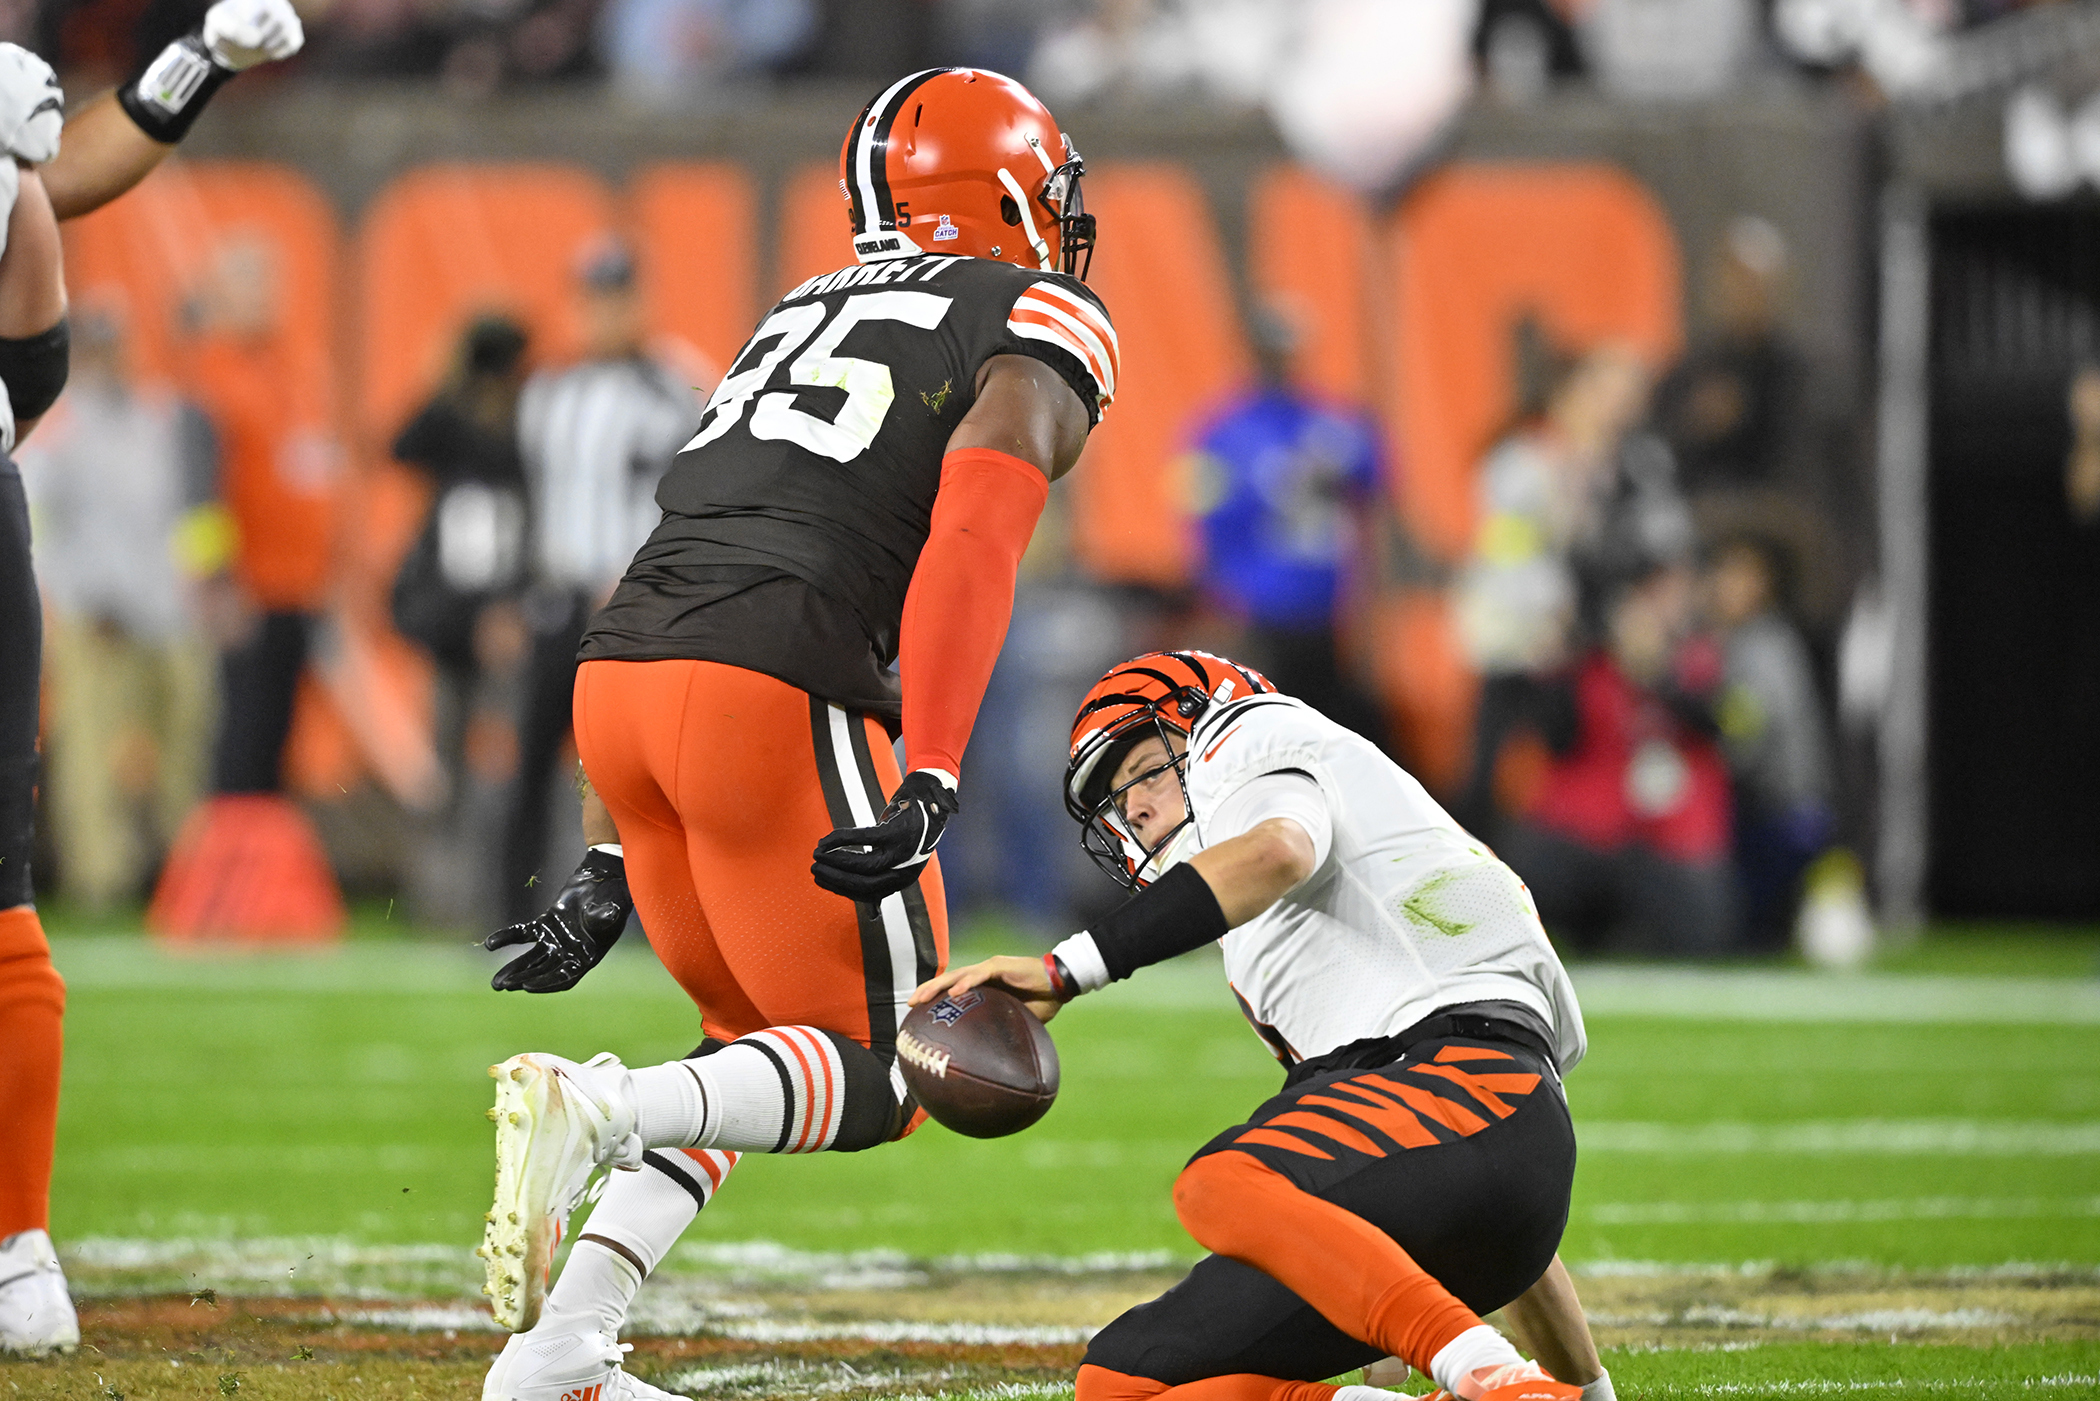 Chubb runs for 2 scores as Browns blast Bengals